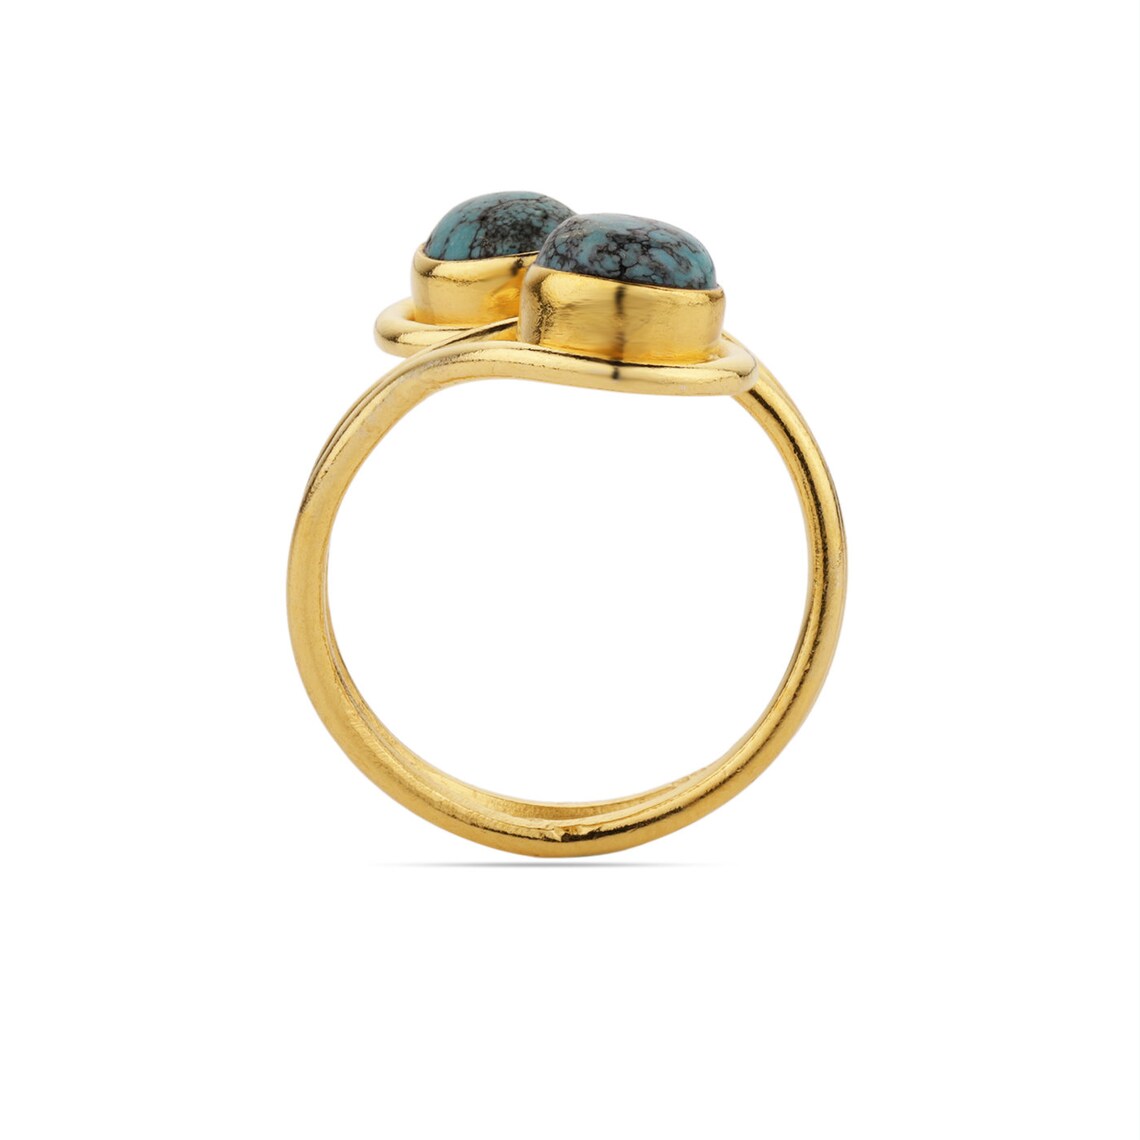 Adjustable Solid Sterling Silver - Gold Plated on 925 Sterling Silver Ring - Turquoise Ring